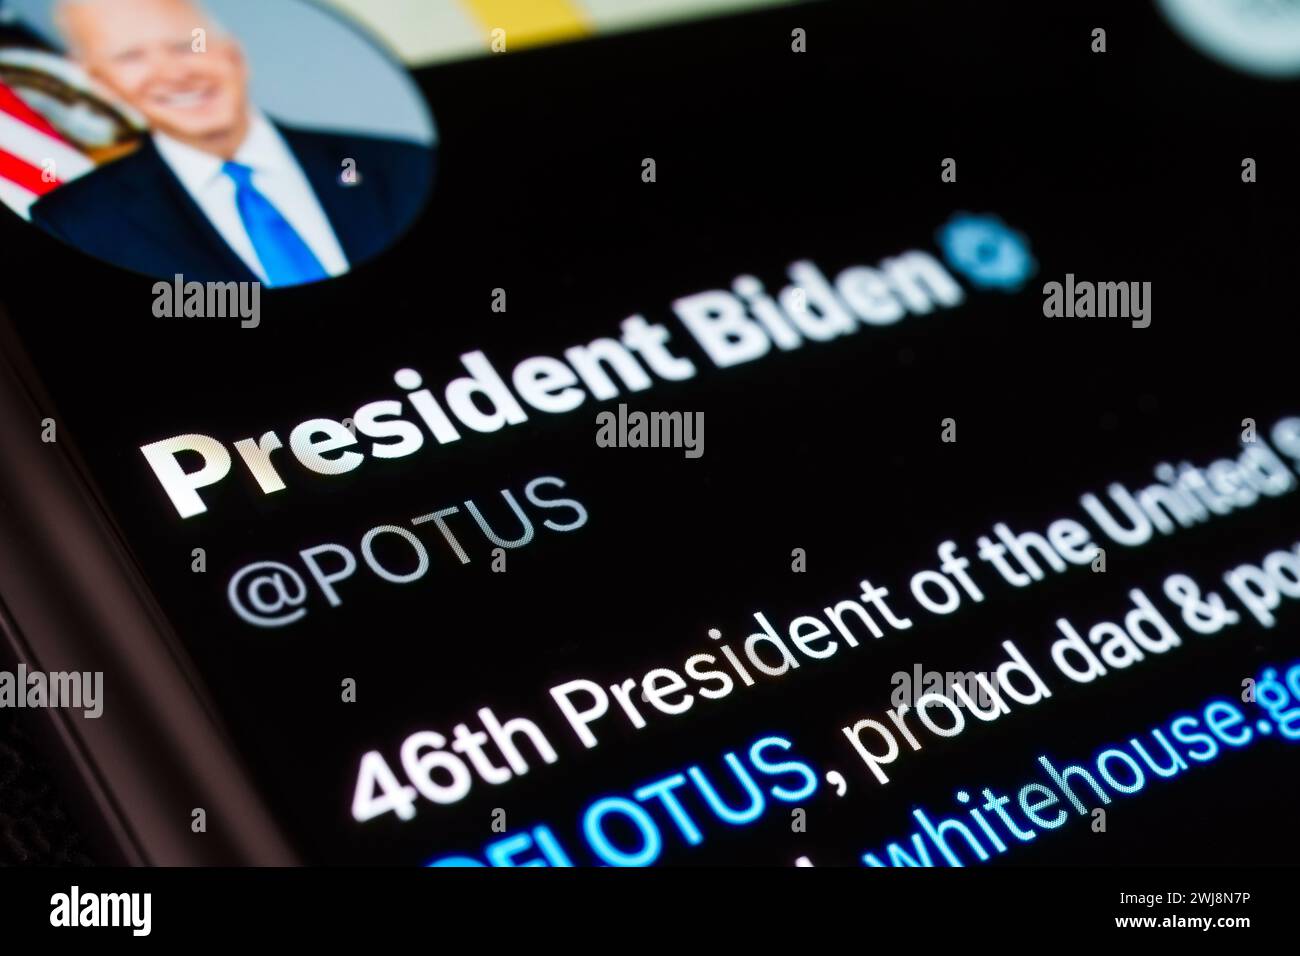 President Biden official X (ex Twitter) page seen on the screen. Stock Photo